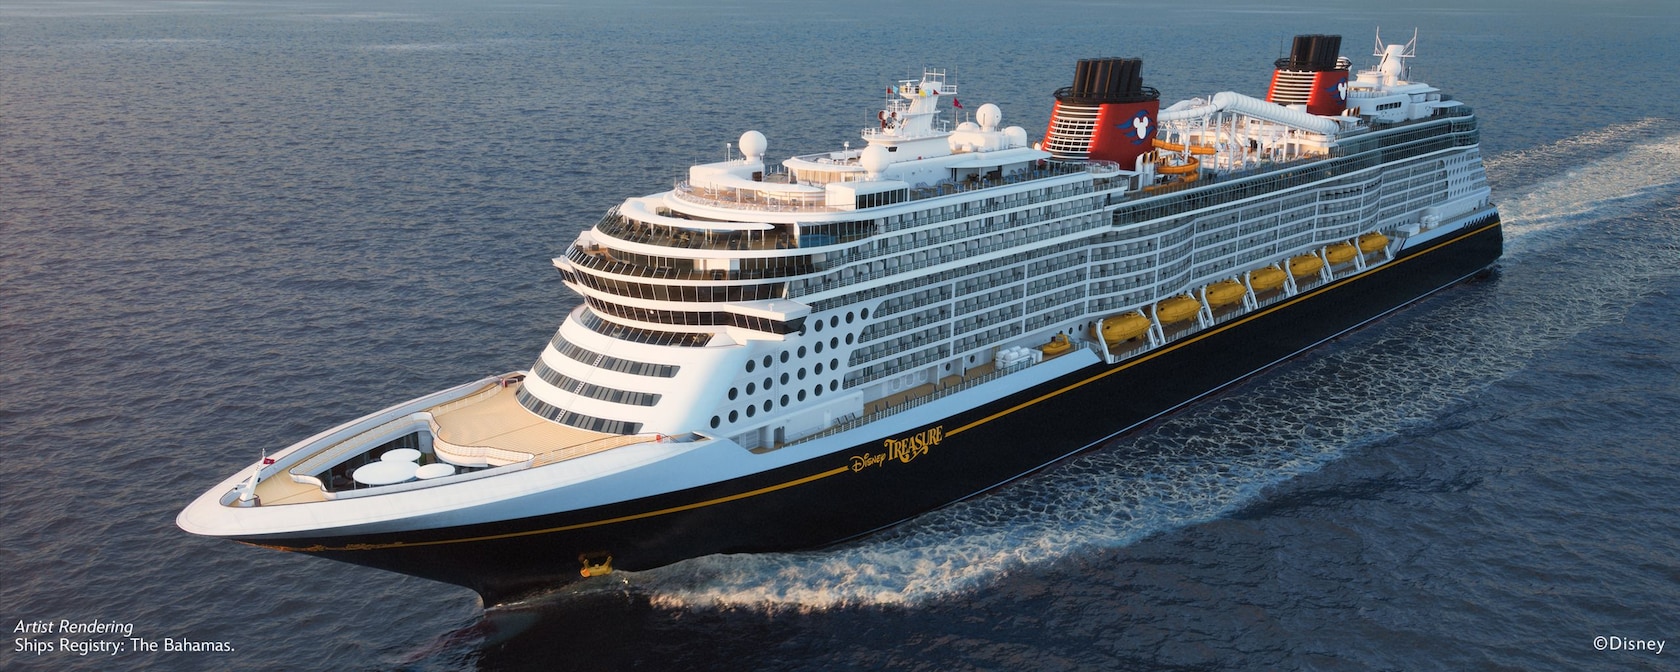 Artist rendering of the Disney Treasure, the newest Disney Cruise Line ship, sailing in open waters